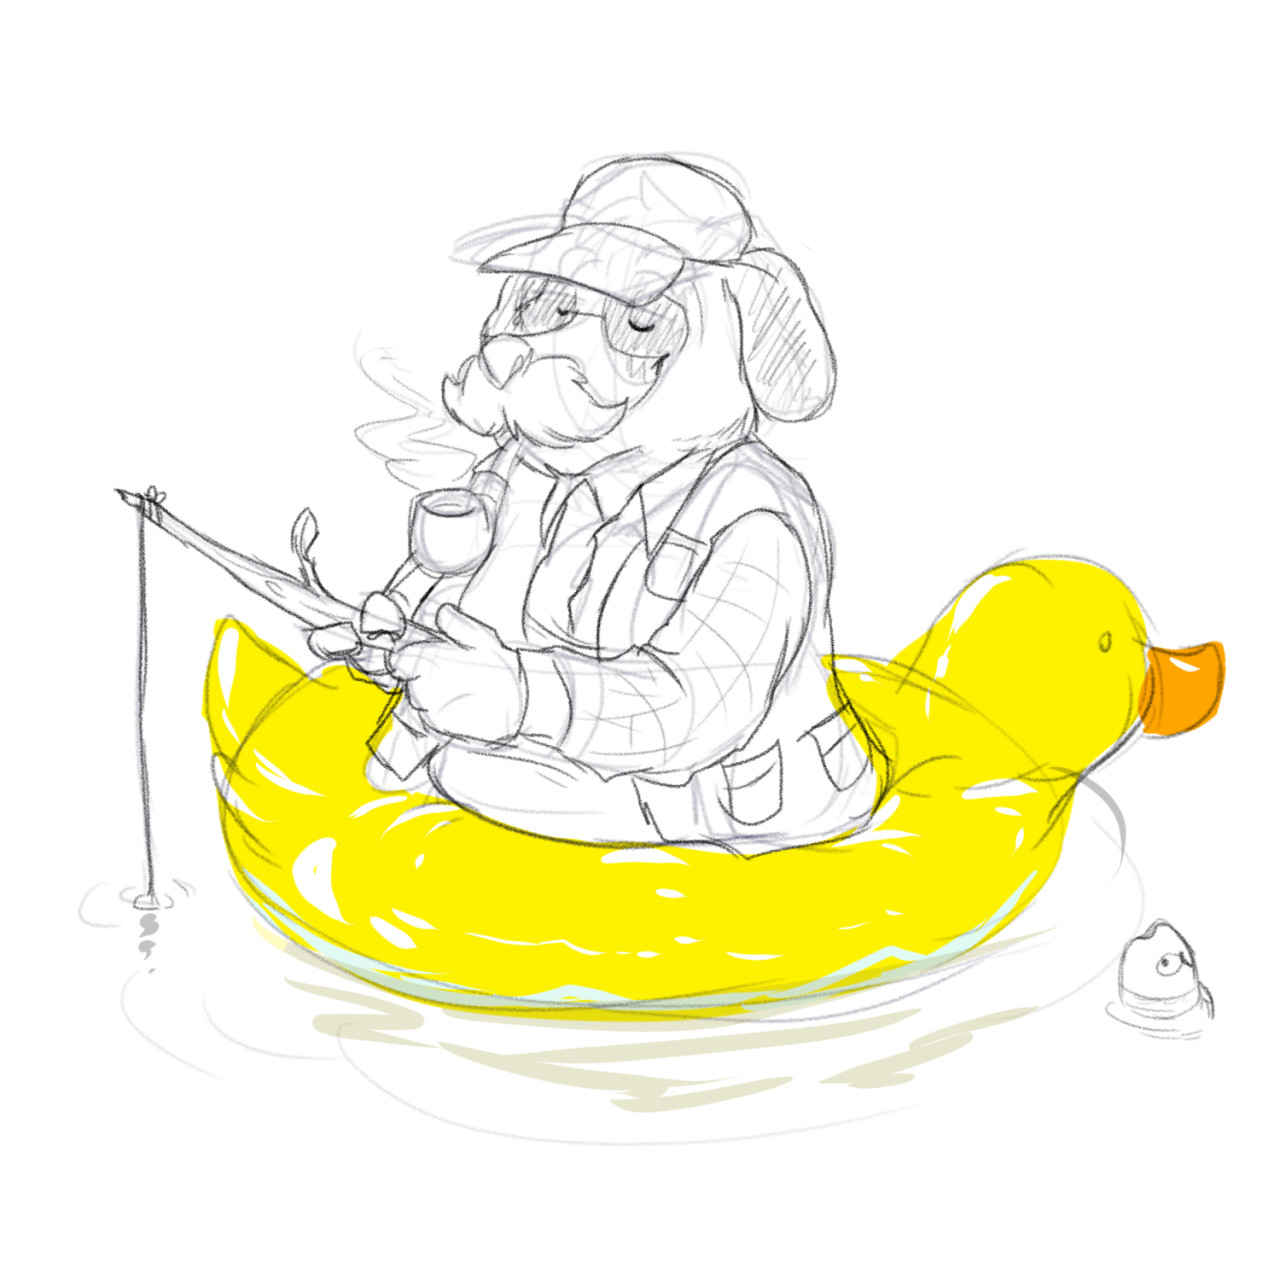 The duck and the fishing float